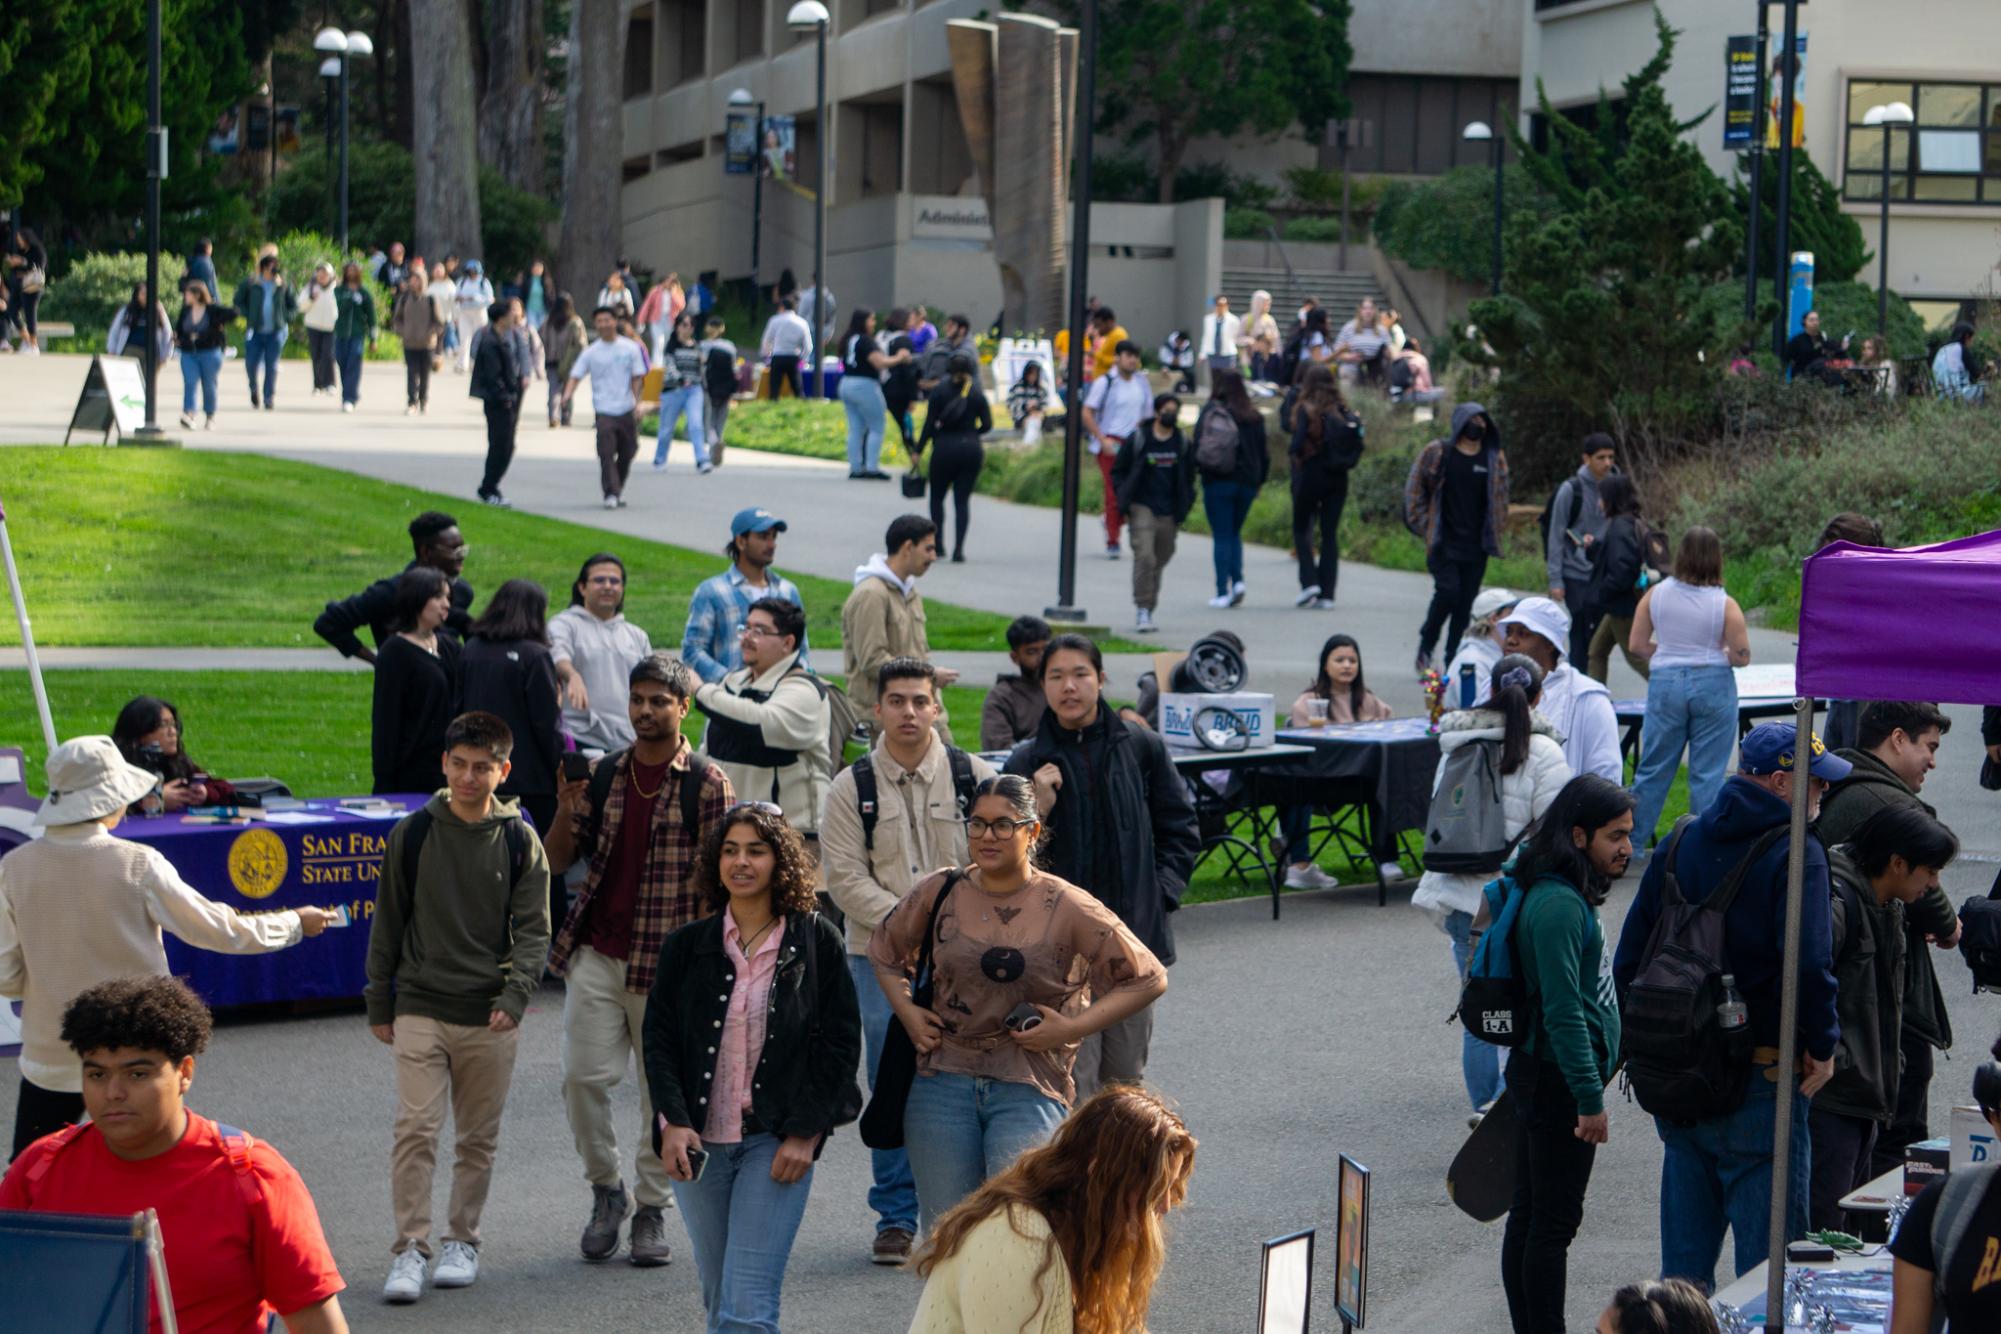 New semester brings new challenges as SFSU community returns for spring